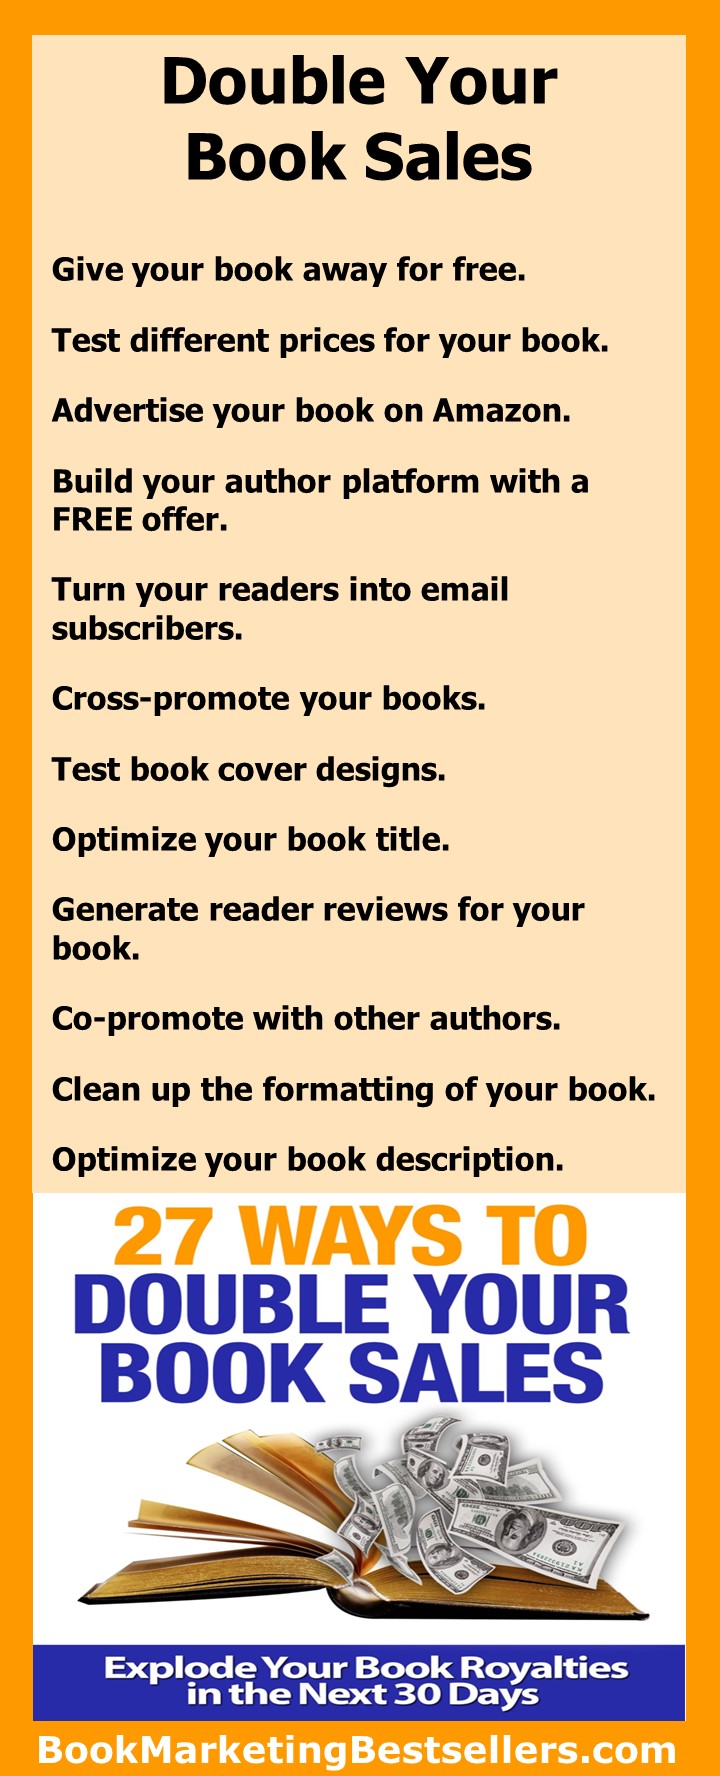 Double Your Book Sales Book Marketing Bestsellers